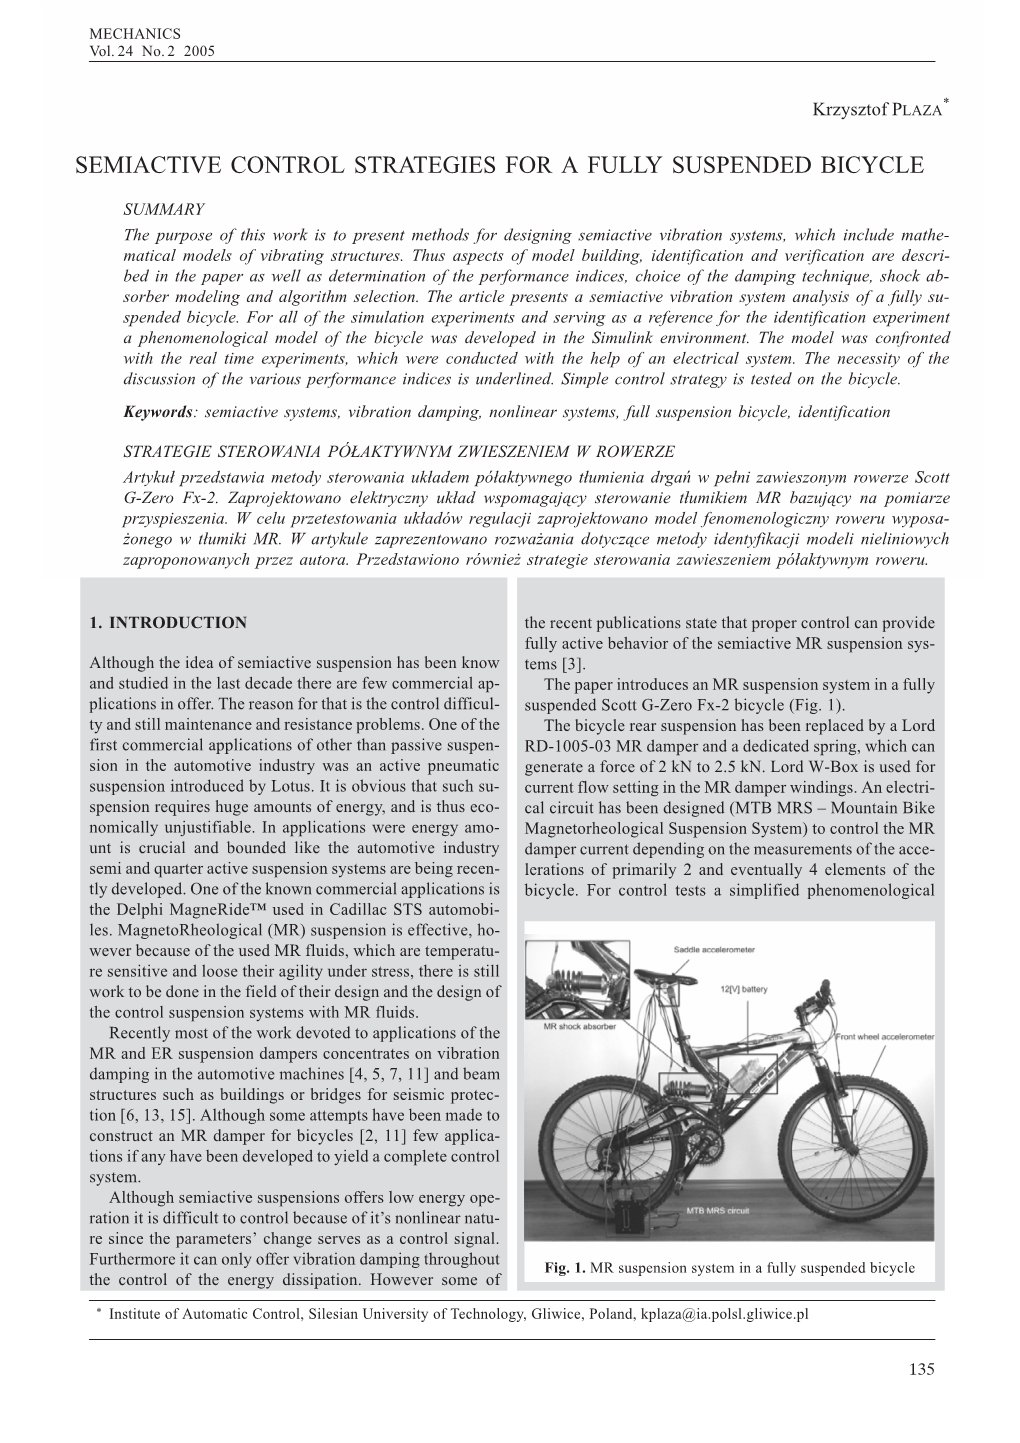 Semiactive Control Strategies for a Fully Suspended Bicycle